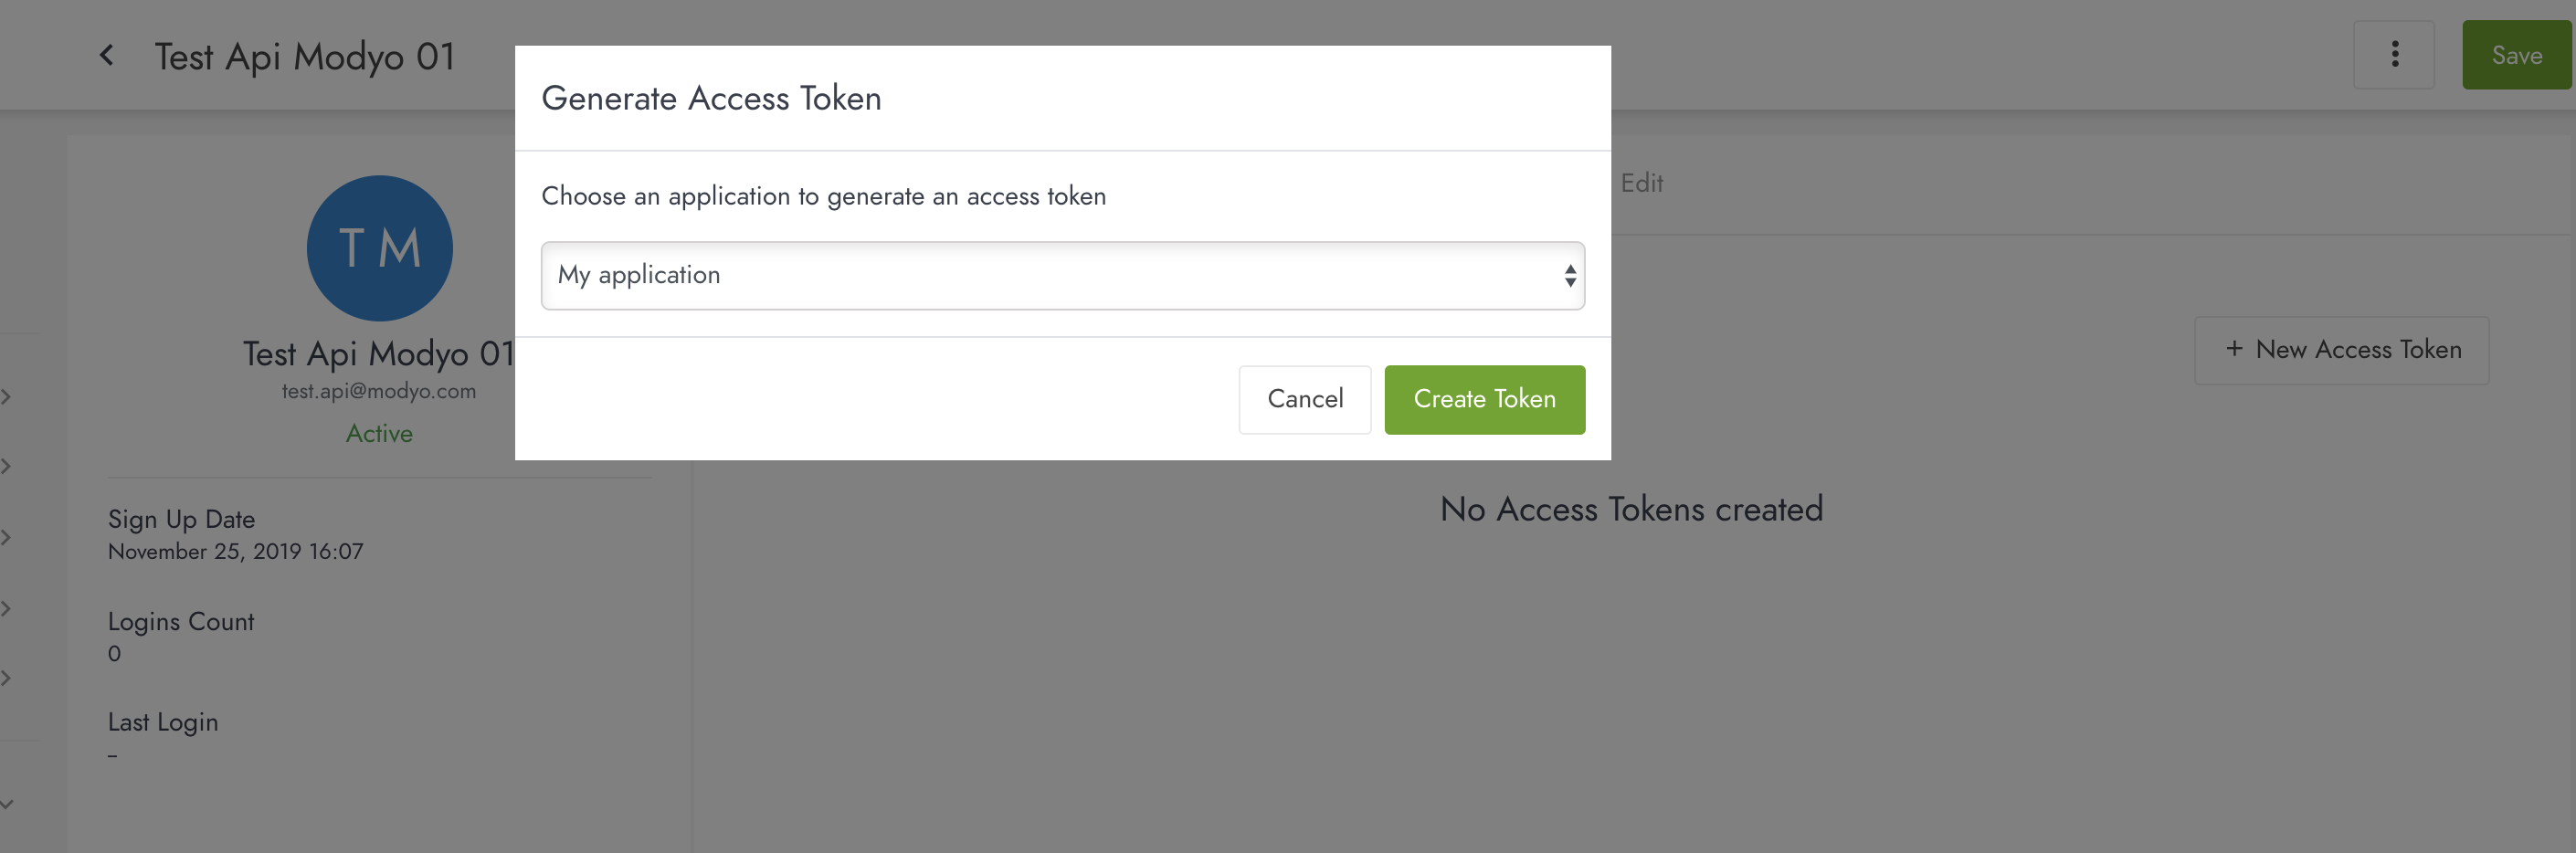 Image showing the Generate Access Token modal window.